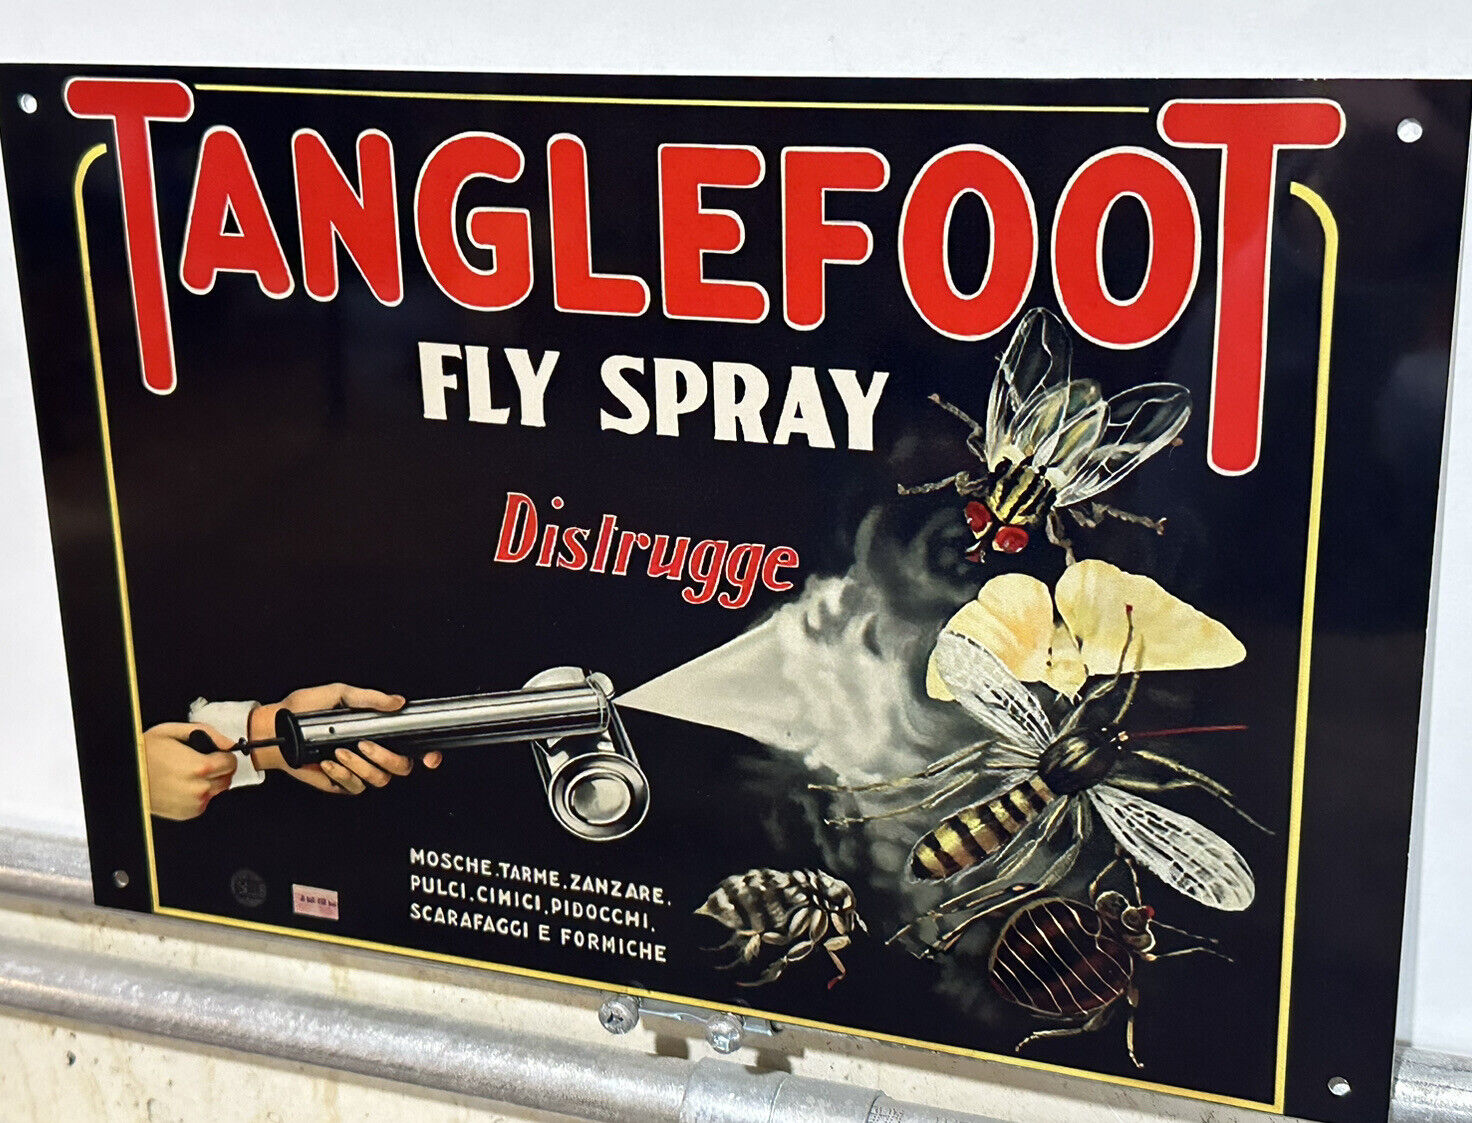 Heavy Vintage Style Tanglefoot Fly Spray Steel Metal Top Quality Sign